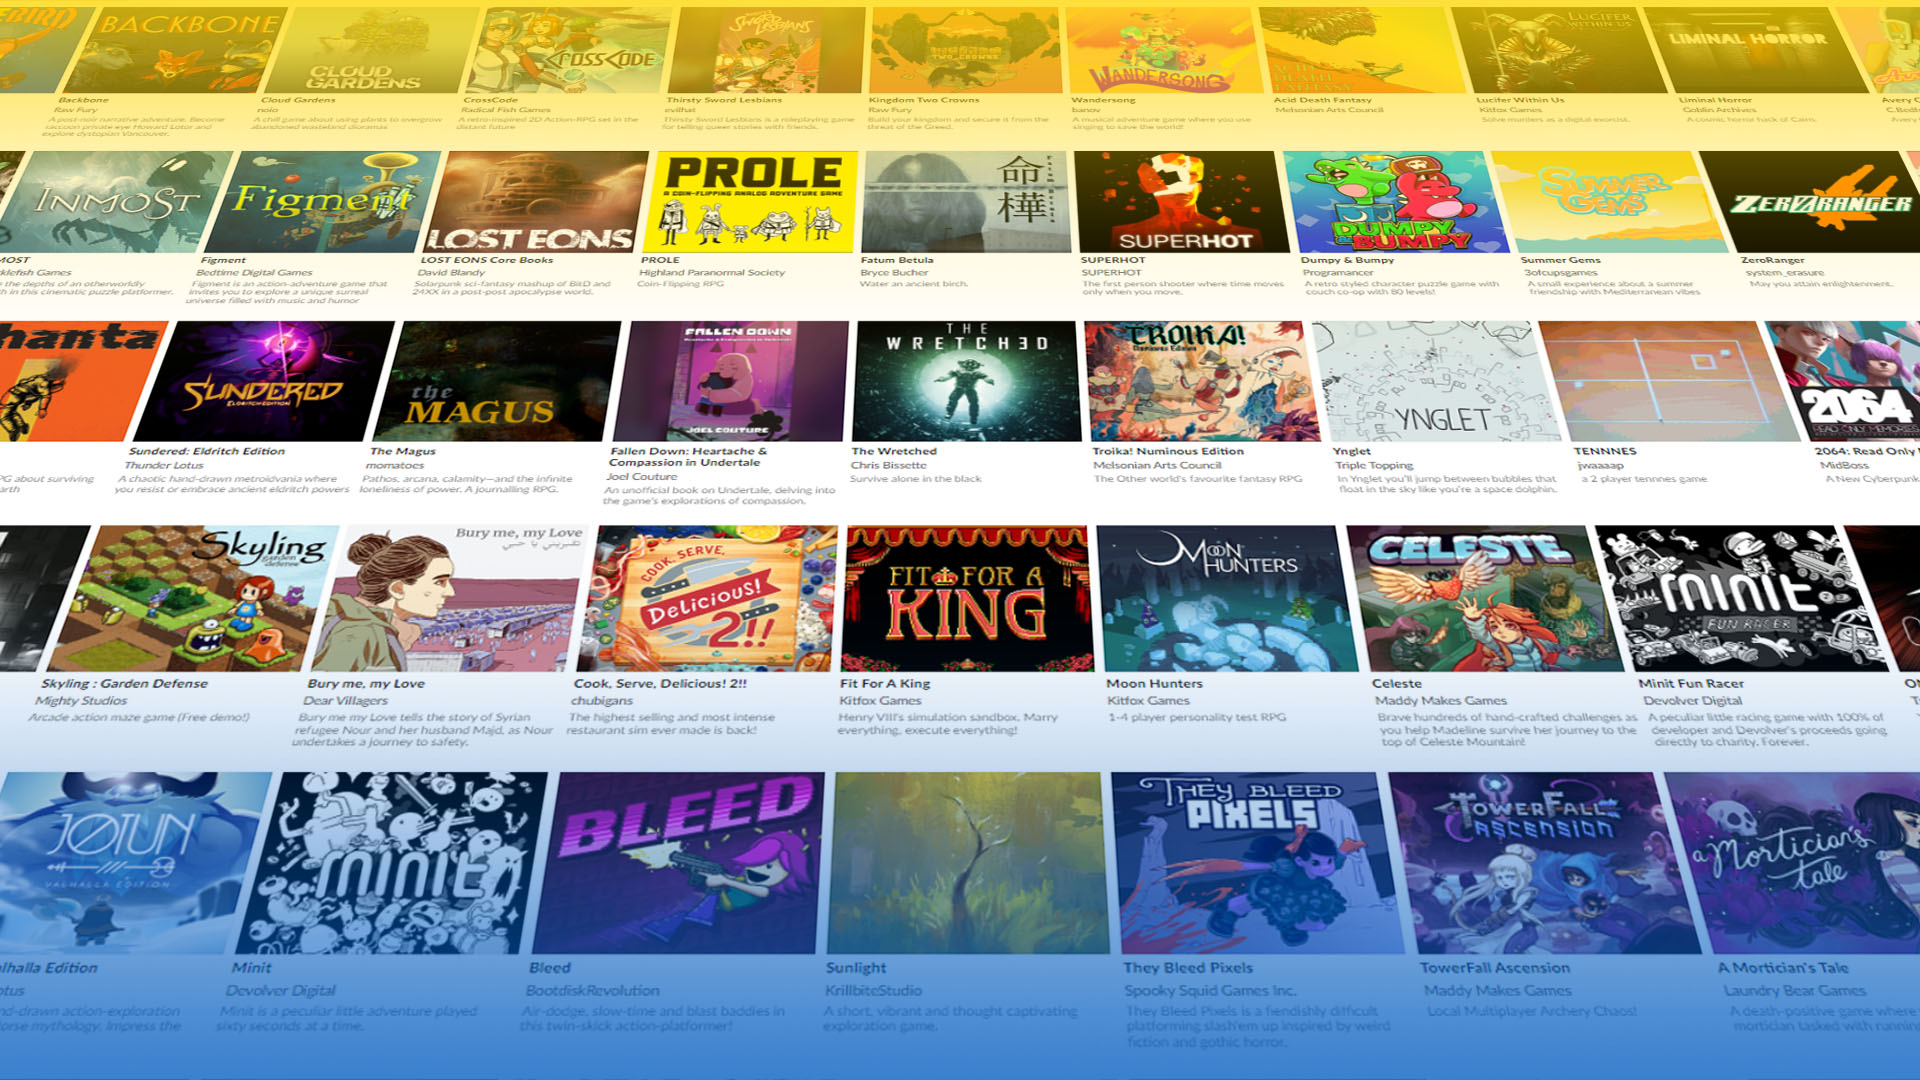 Catch over 500 PC video games for $10 in Itch.io’s bundle for Ukrainian charity